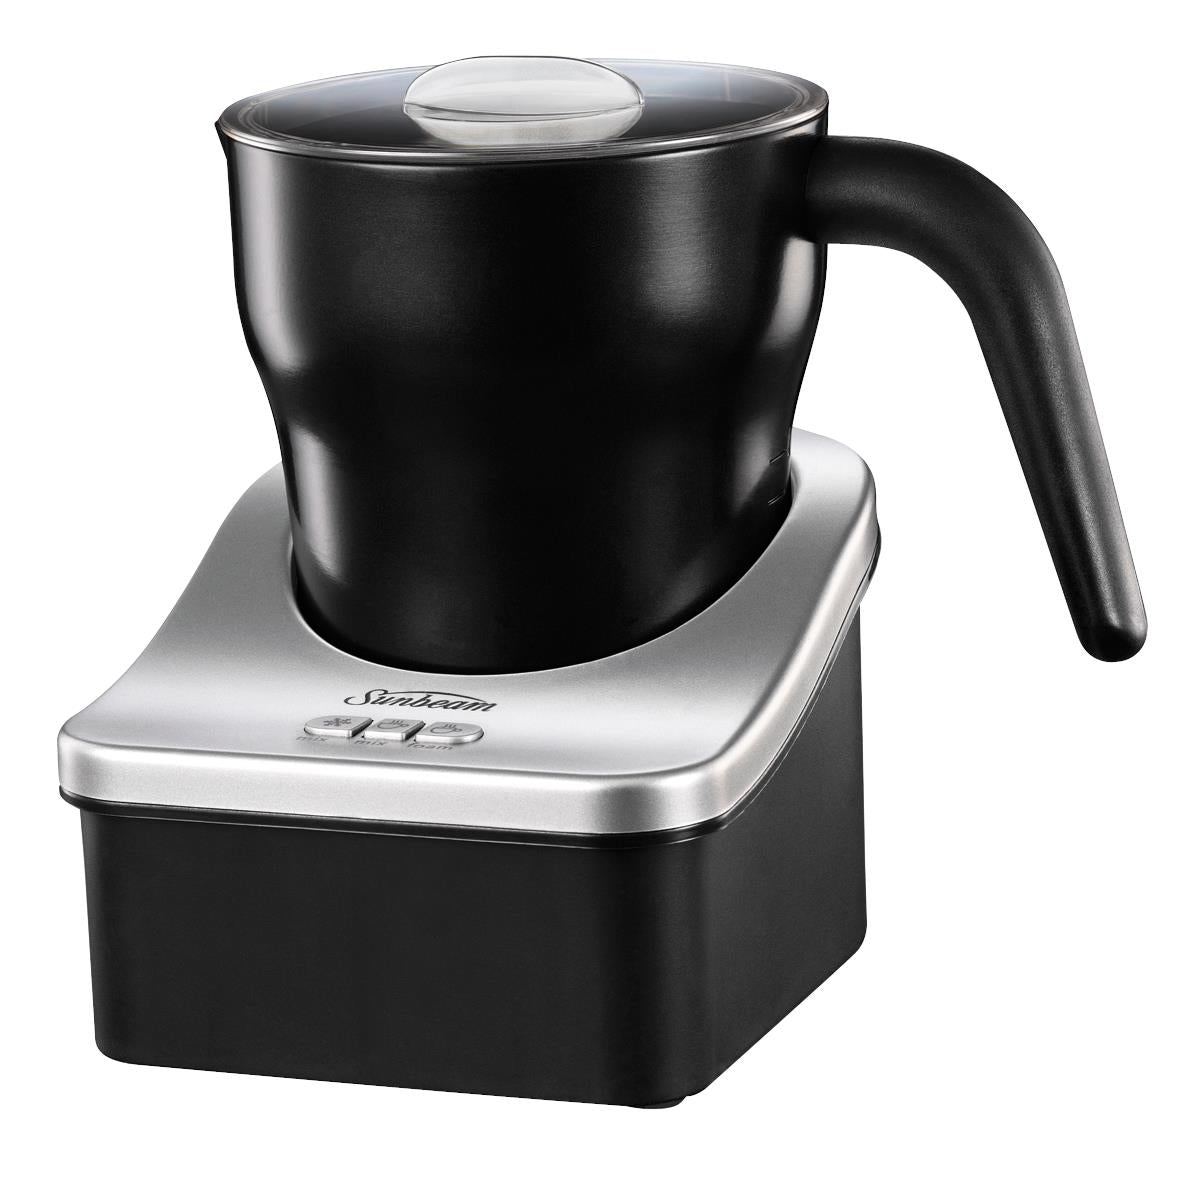 Delm Milk Frother Electric USB Stainless Steel Accessory (Black)